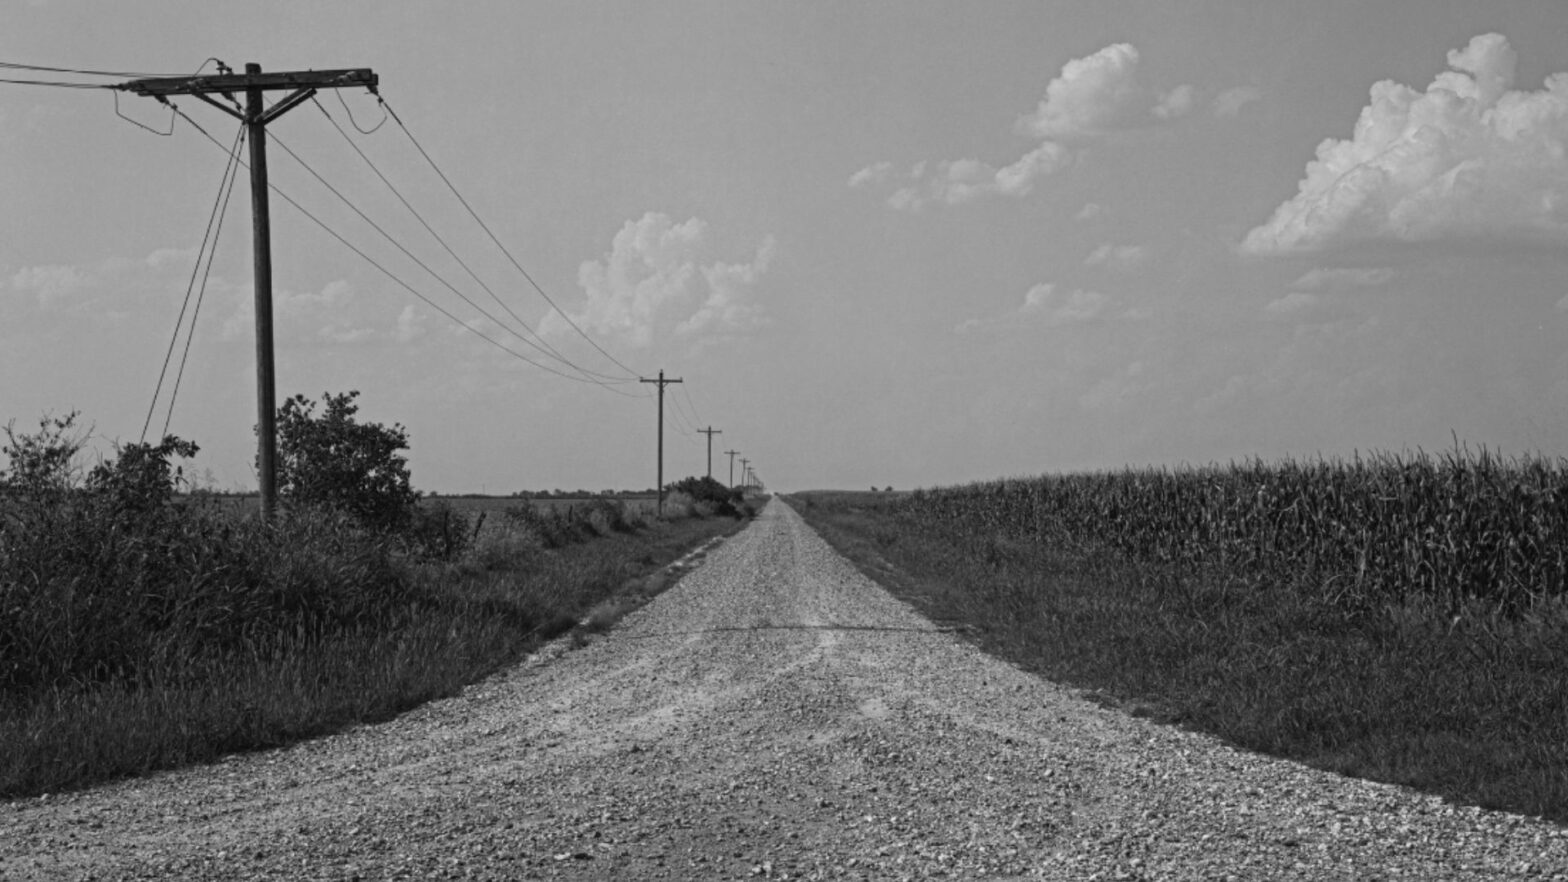 A photograph from the Kansas border, captured by artist Cary Conover.